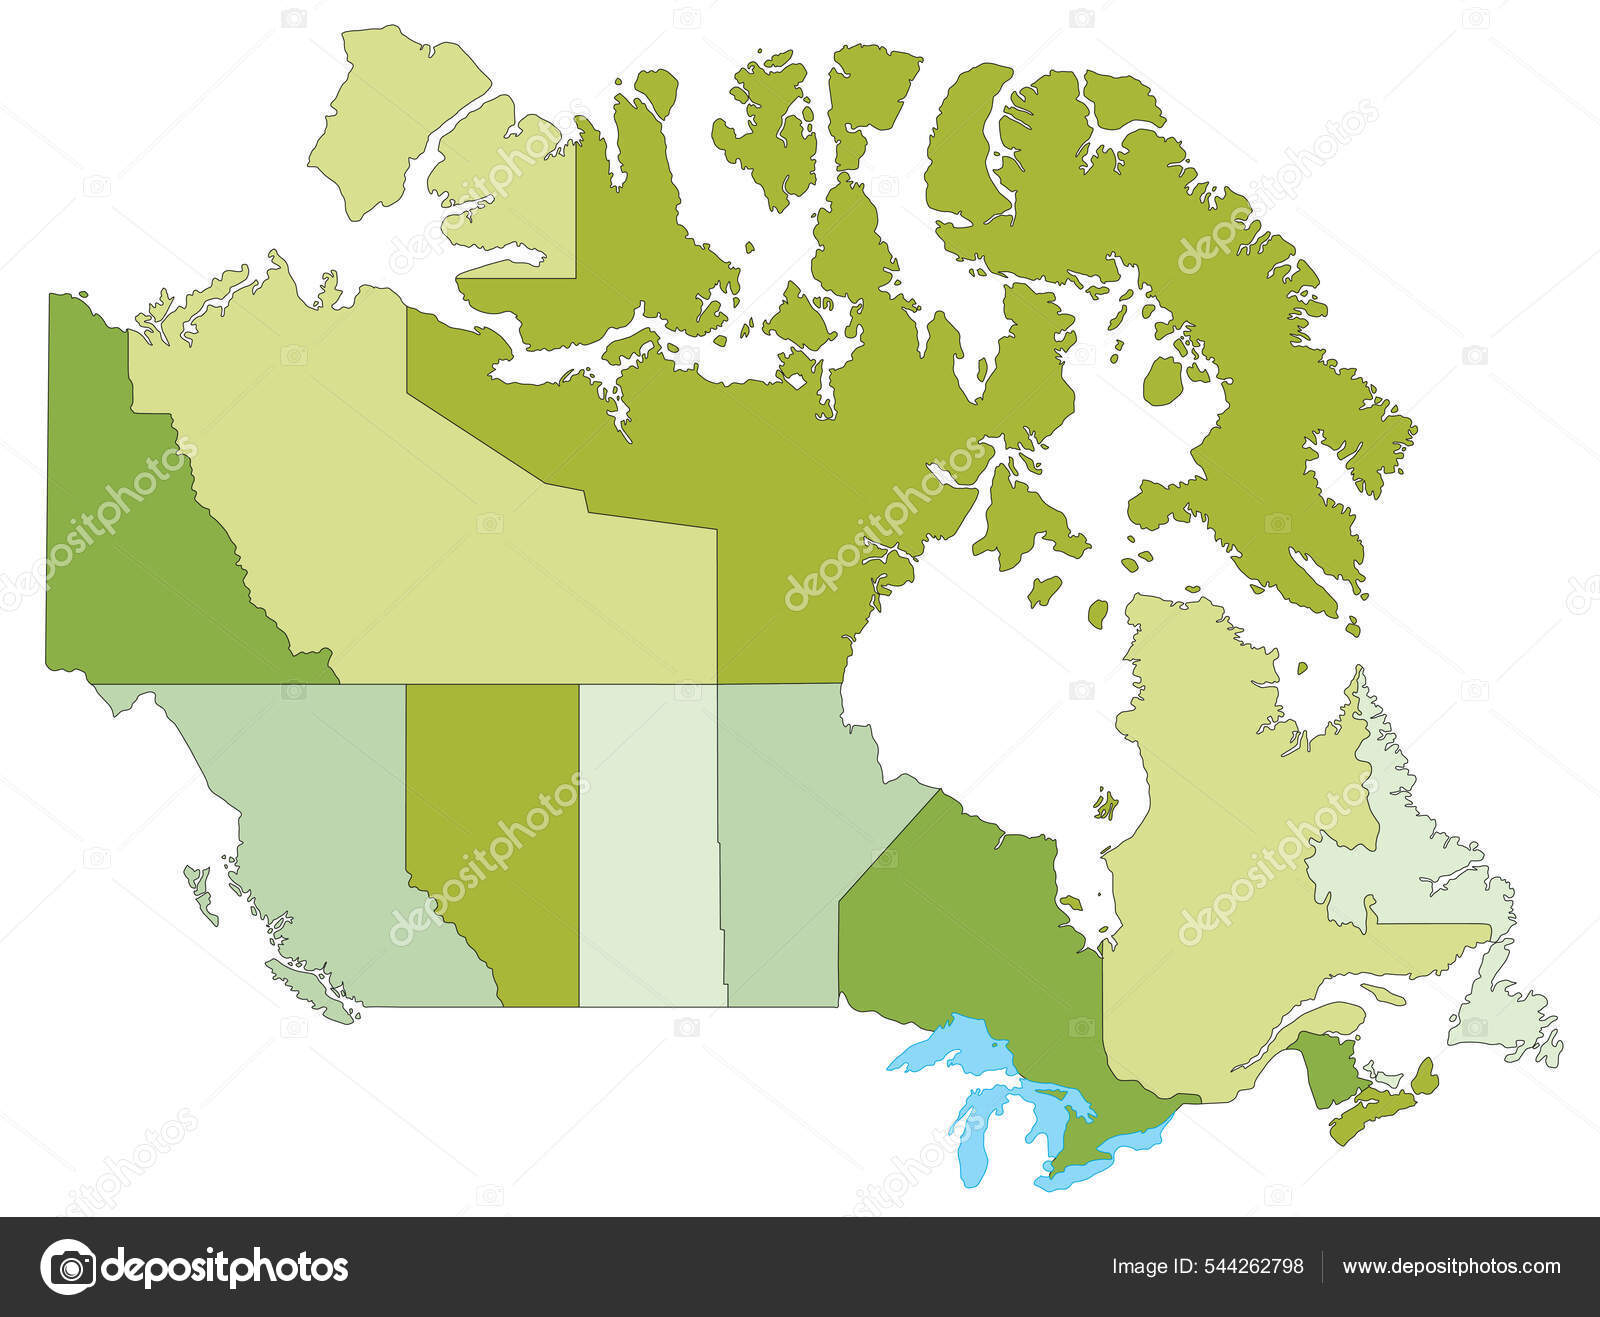 Highly Detailed Editable Political Map Separated Layers Canada